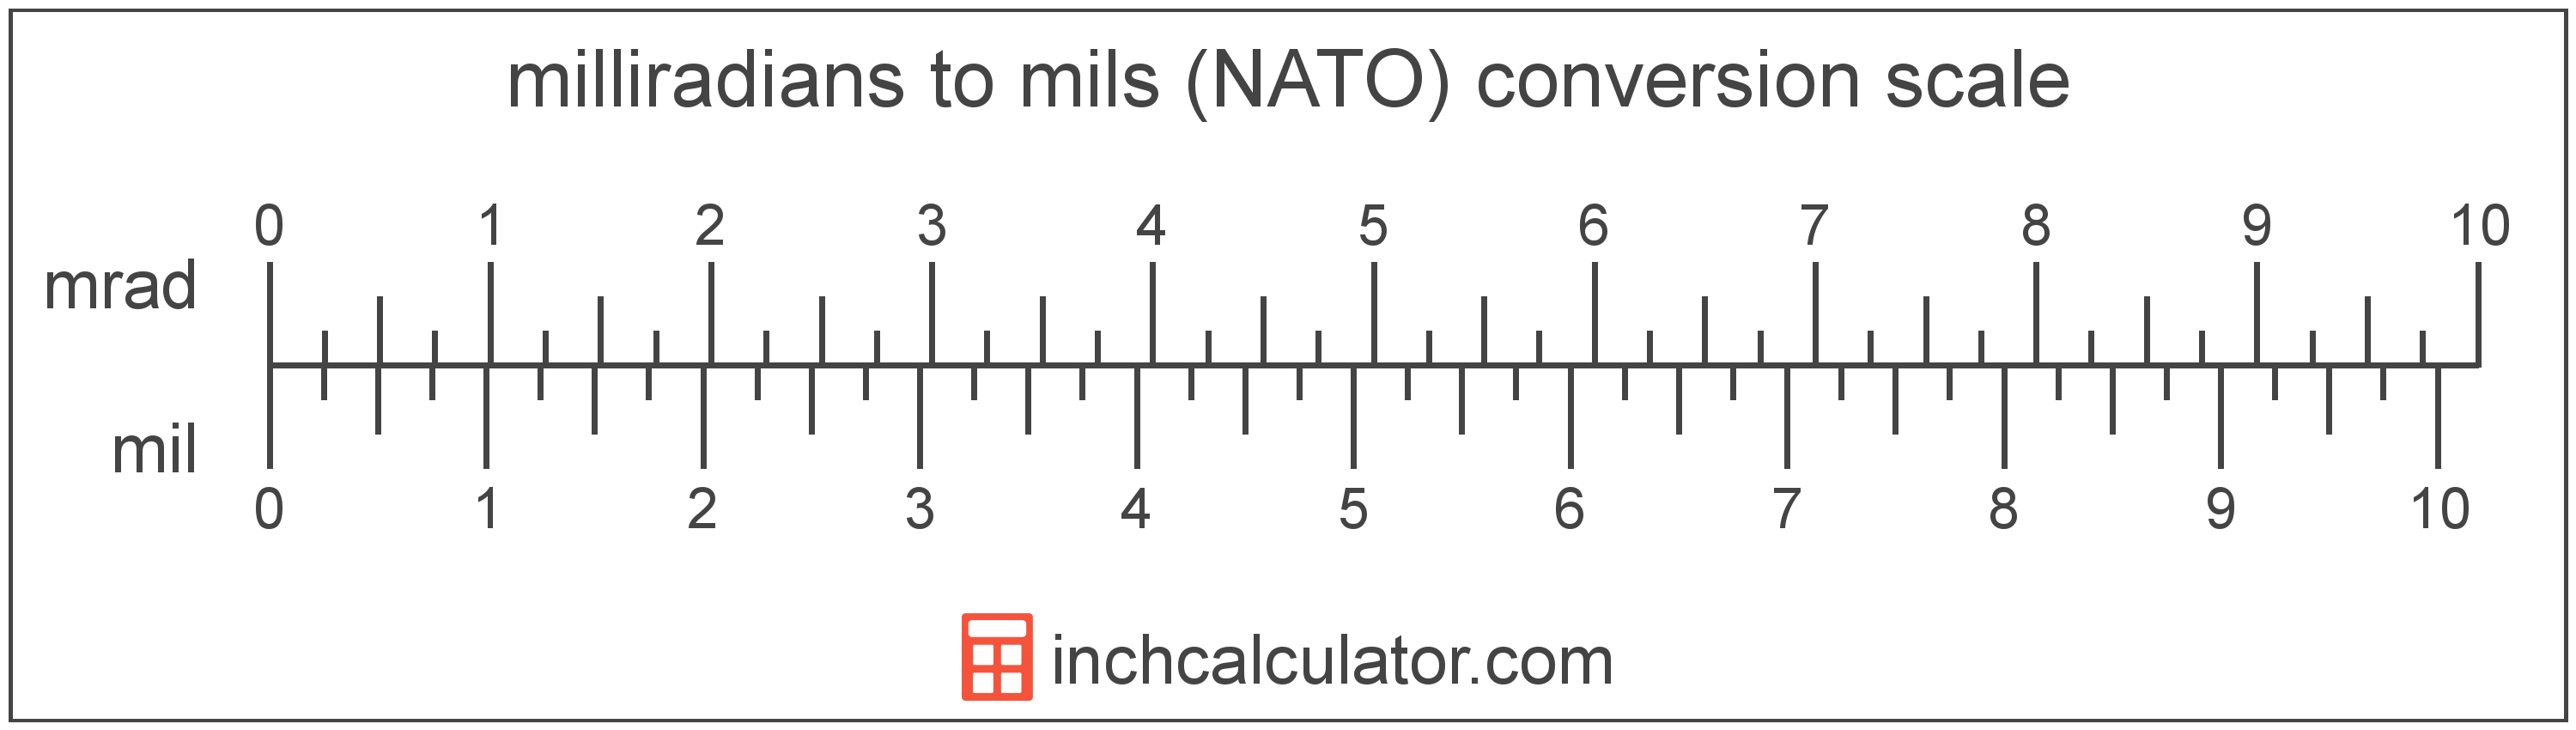 conversion scale showing mils (NATO) and equivalent milliradians angle values